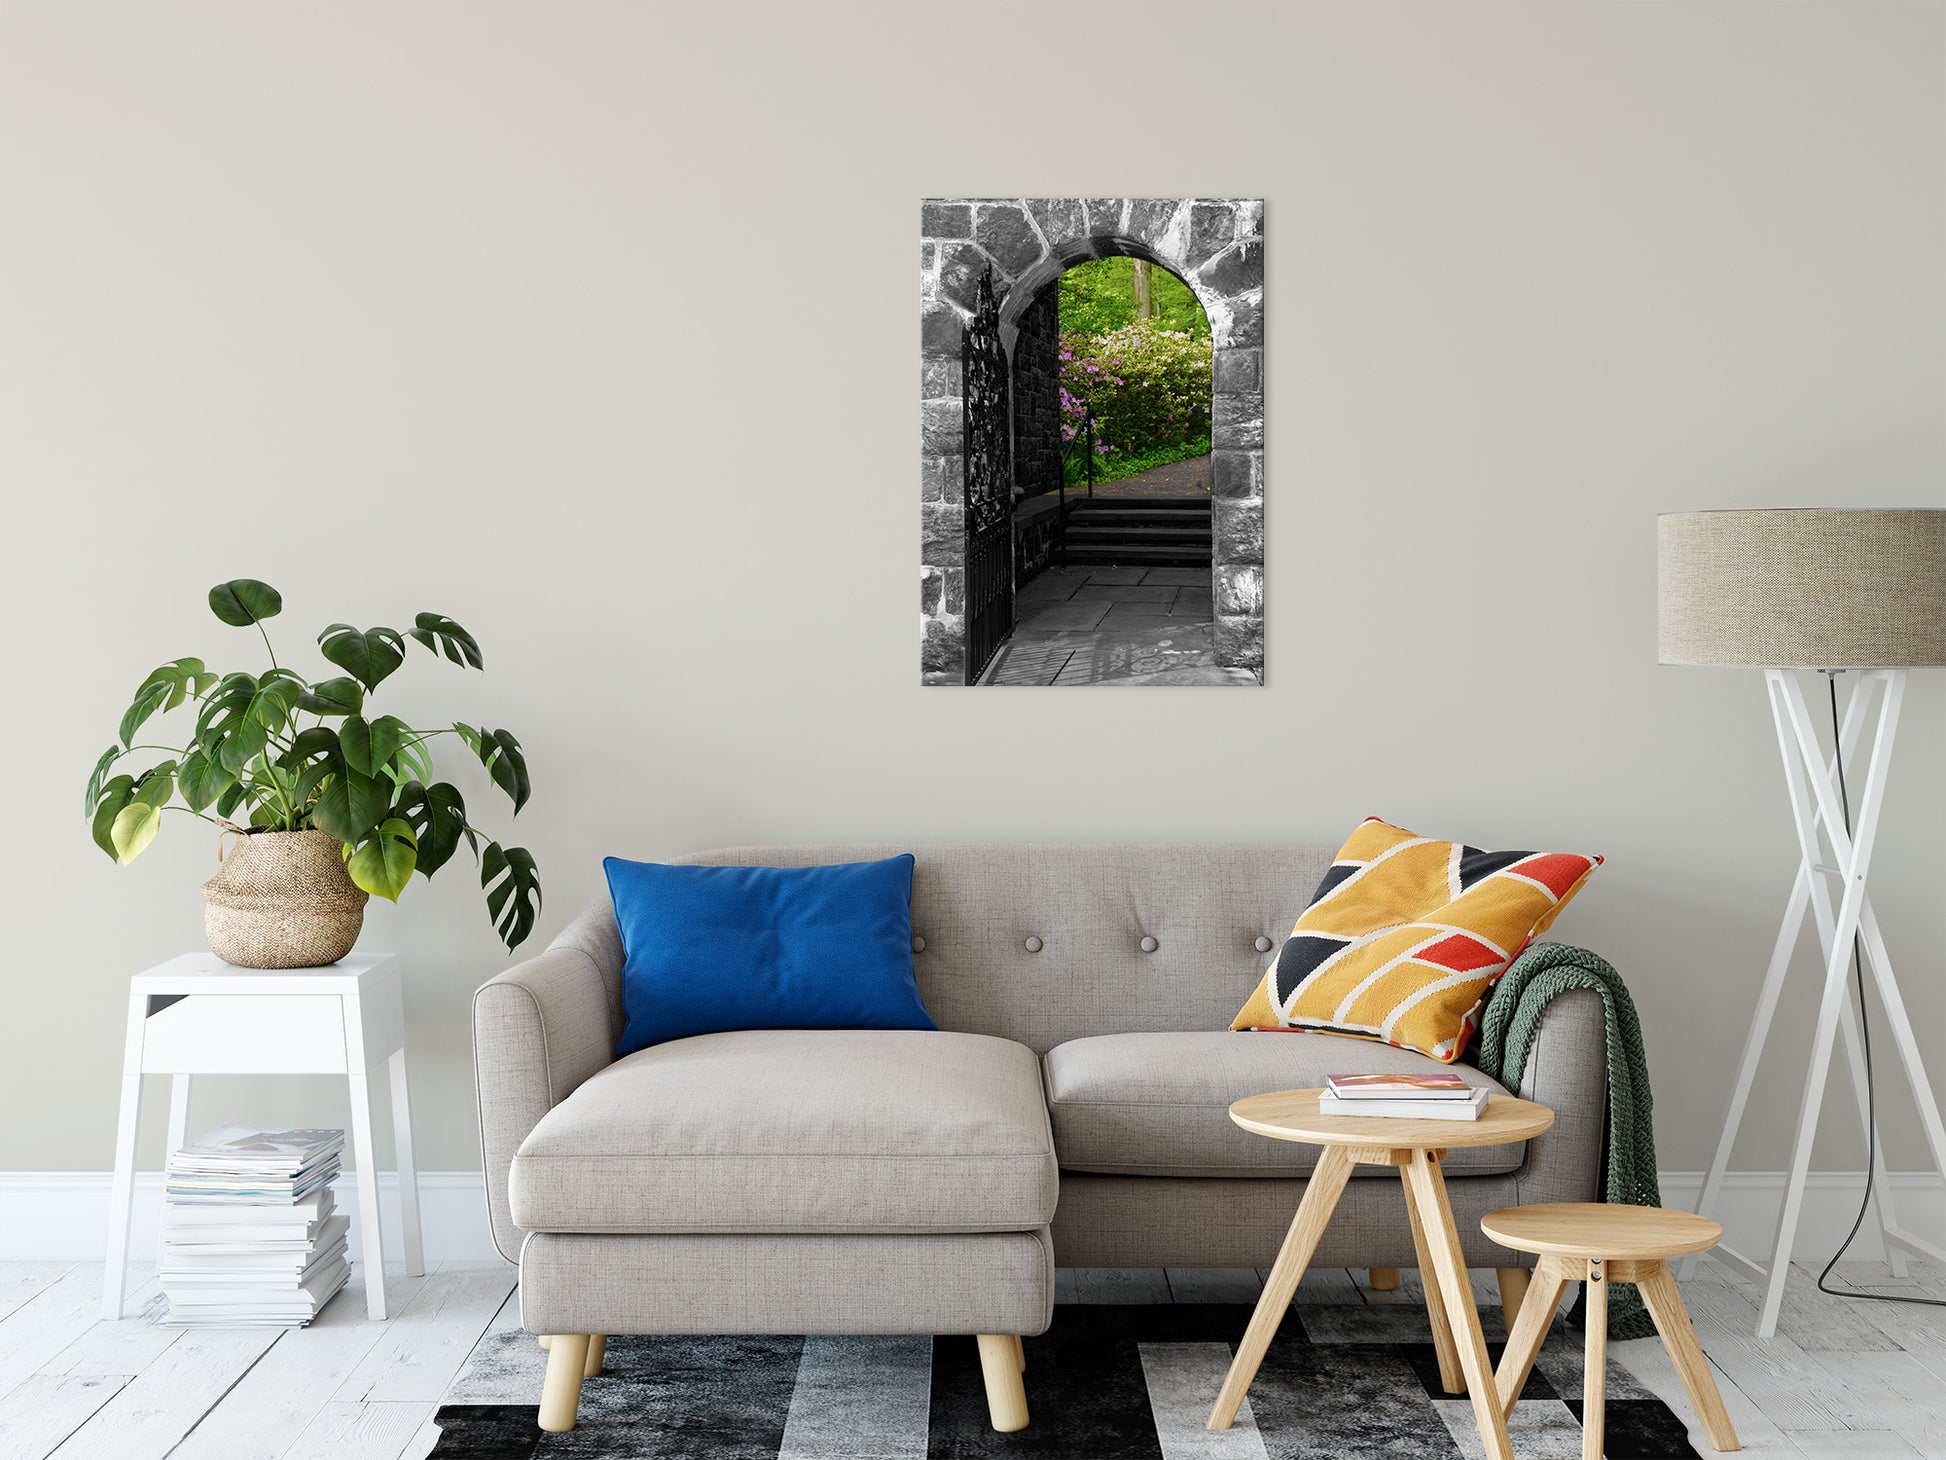 Garden Entryway Nature / Floral Photo Fine Art Canvas Wall Art Prints 24" x 36" - PIPAFINEART